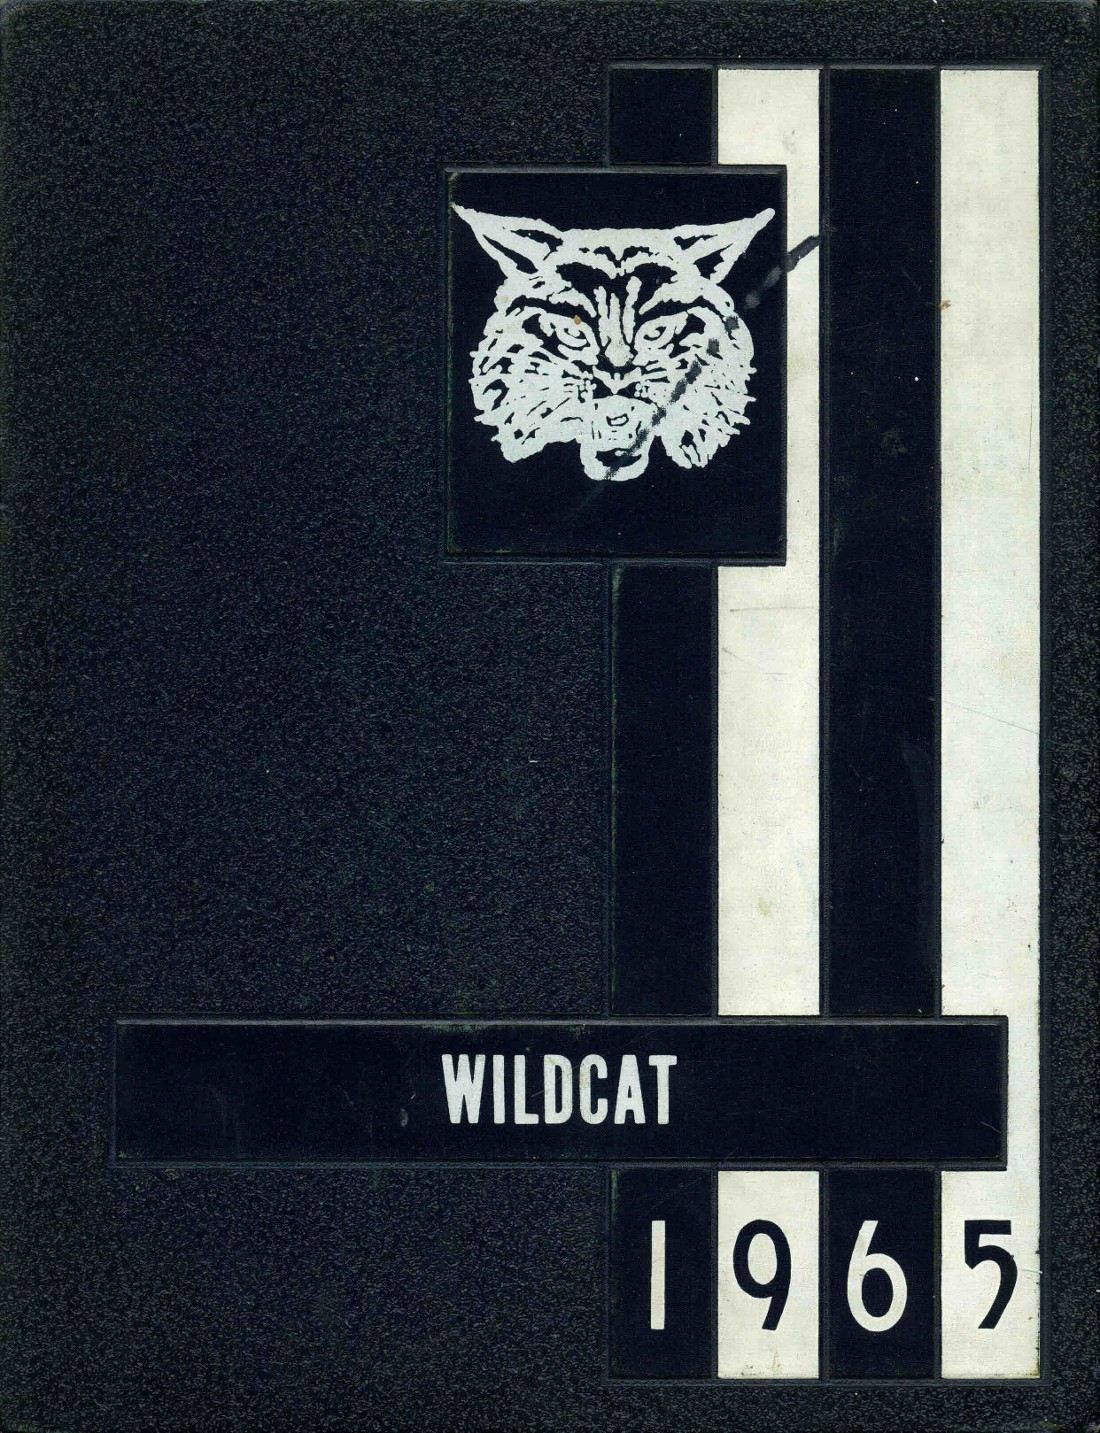 1965 yearbook from Pittsford High School from Pittsford, Michigan